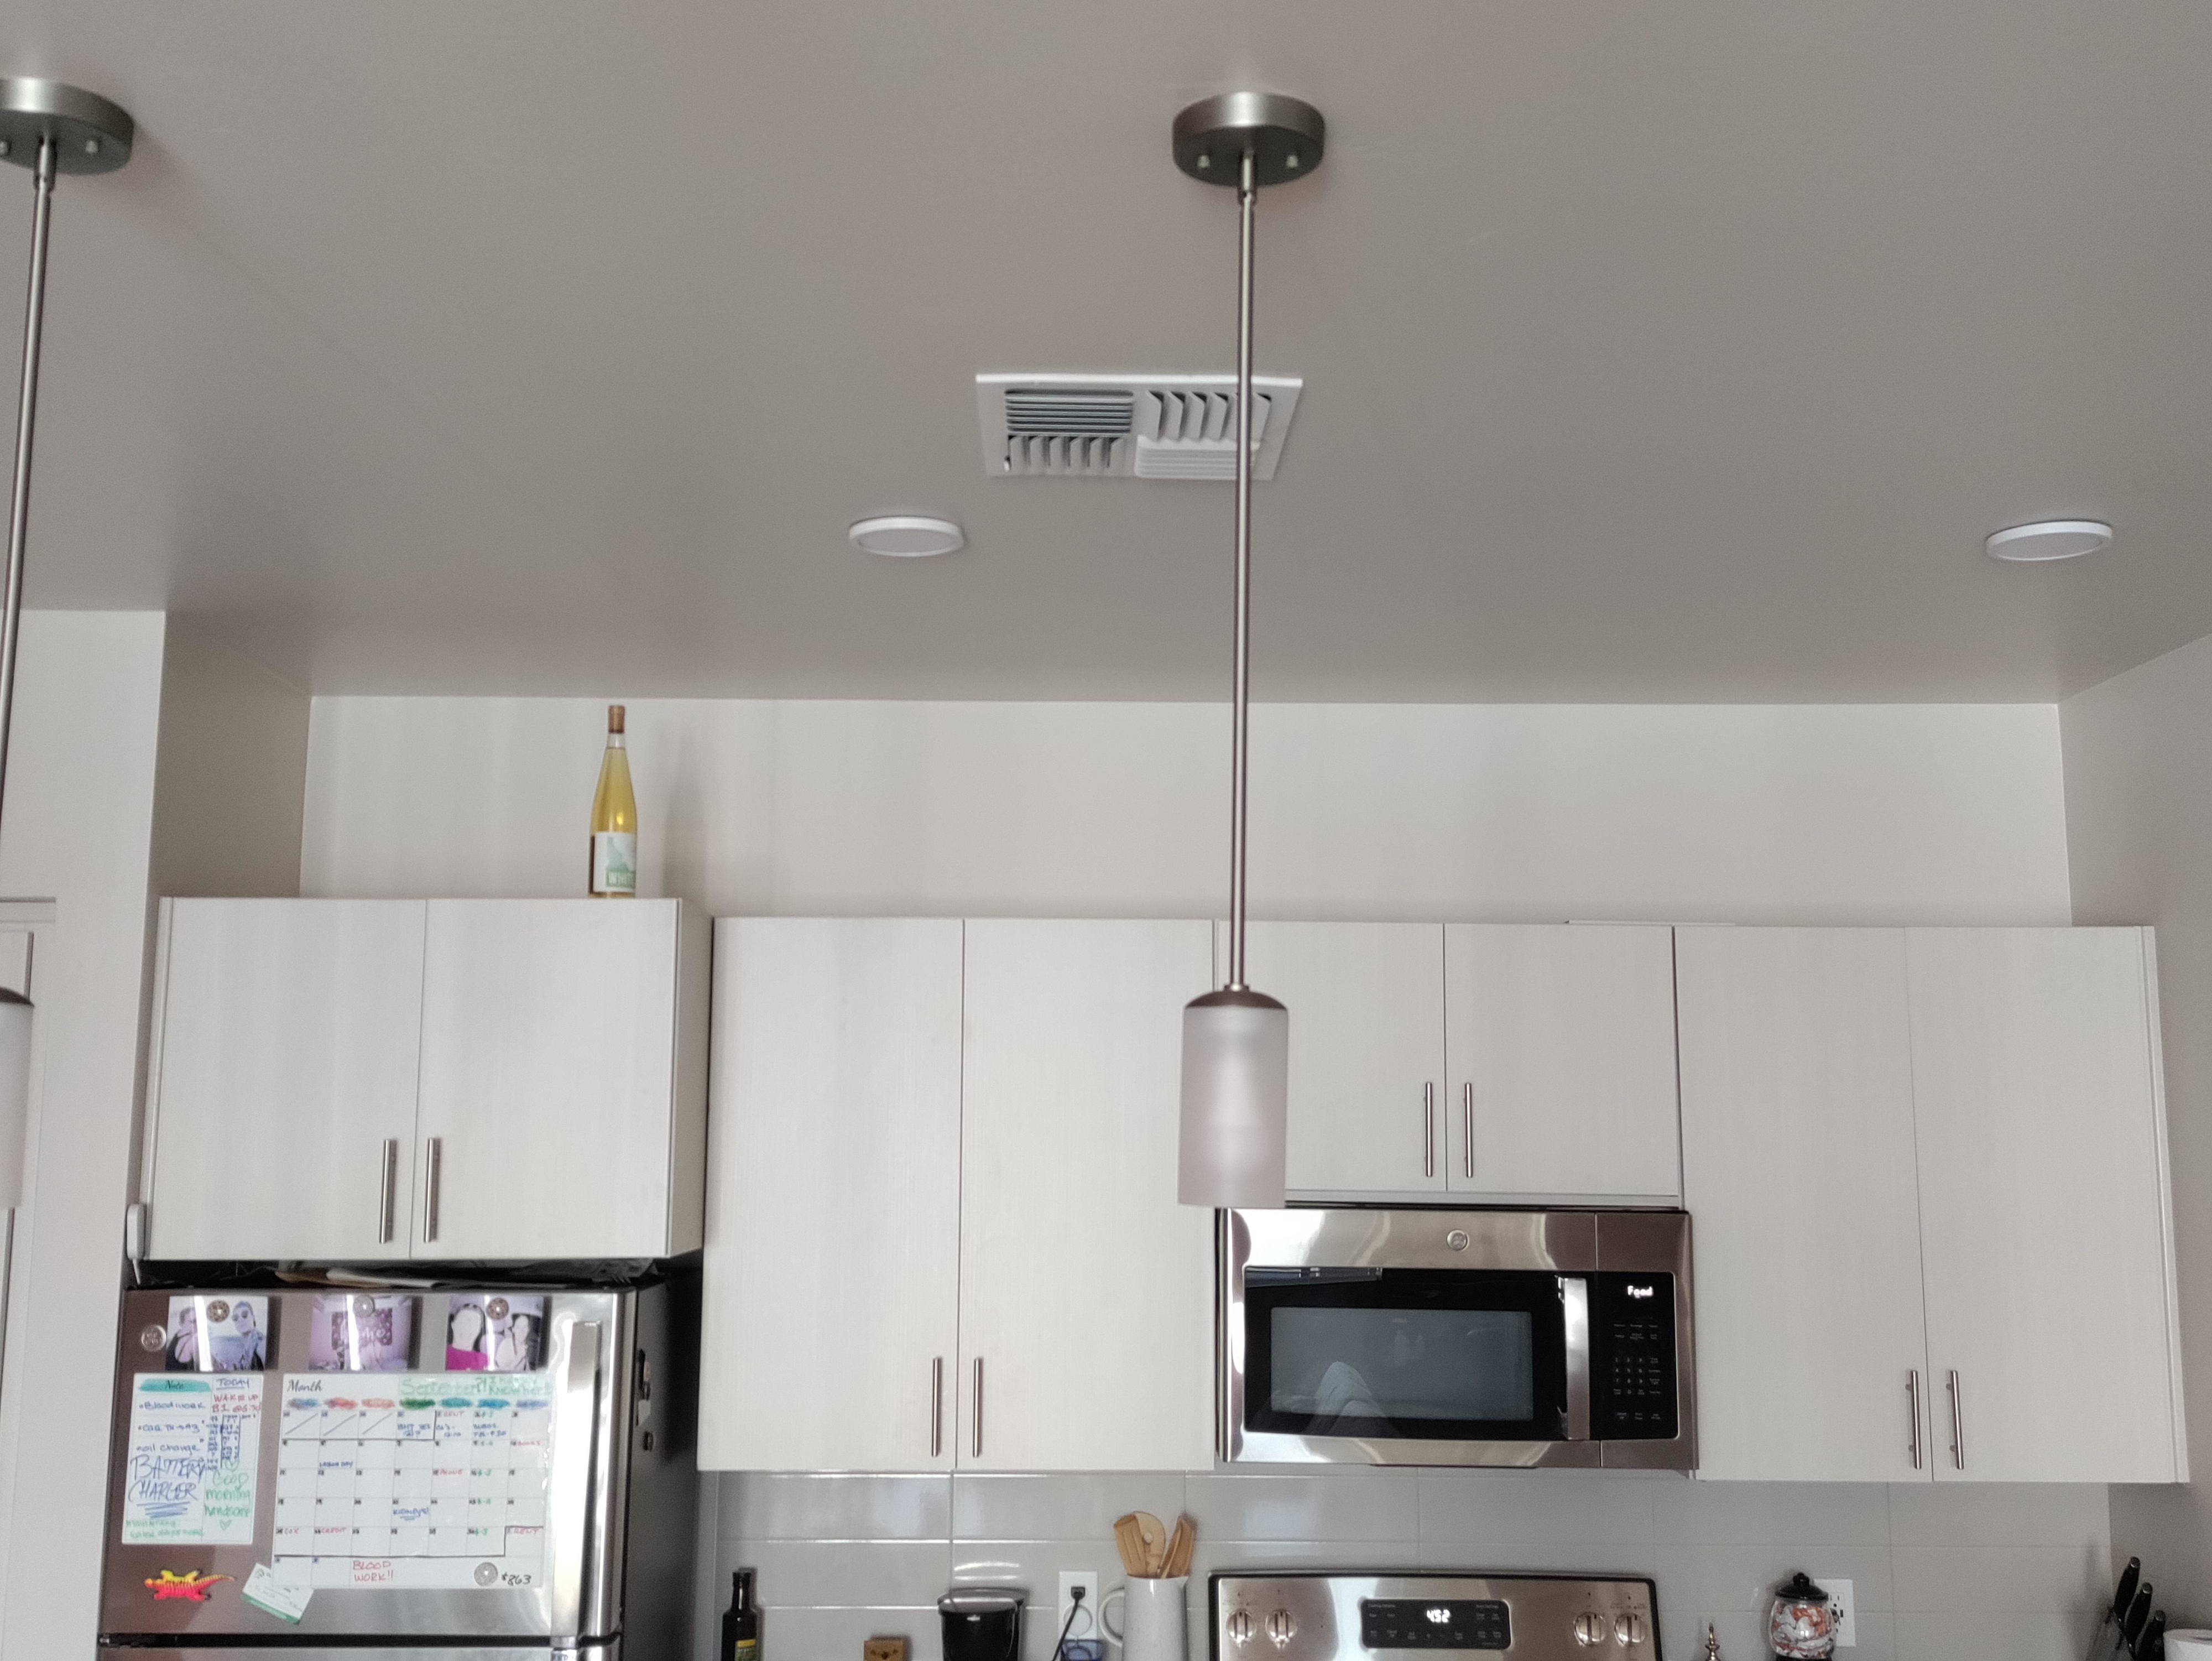 space above kitchen cabinets